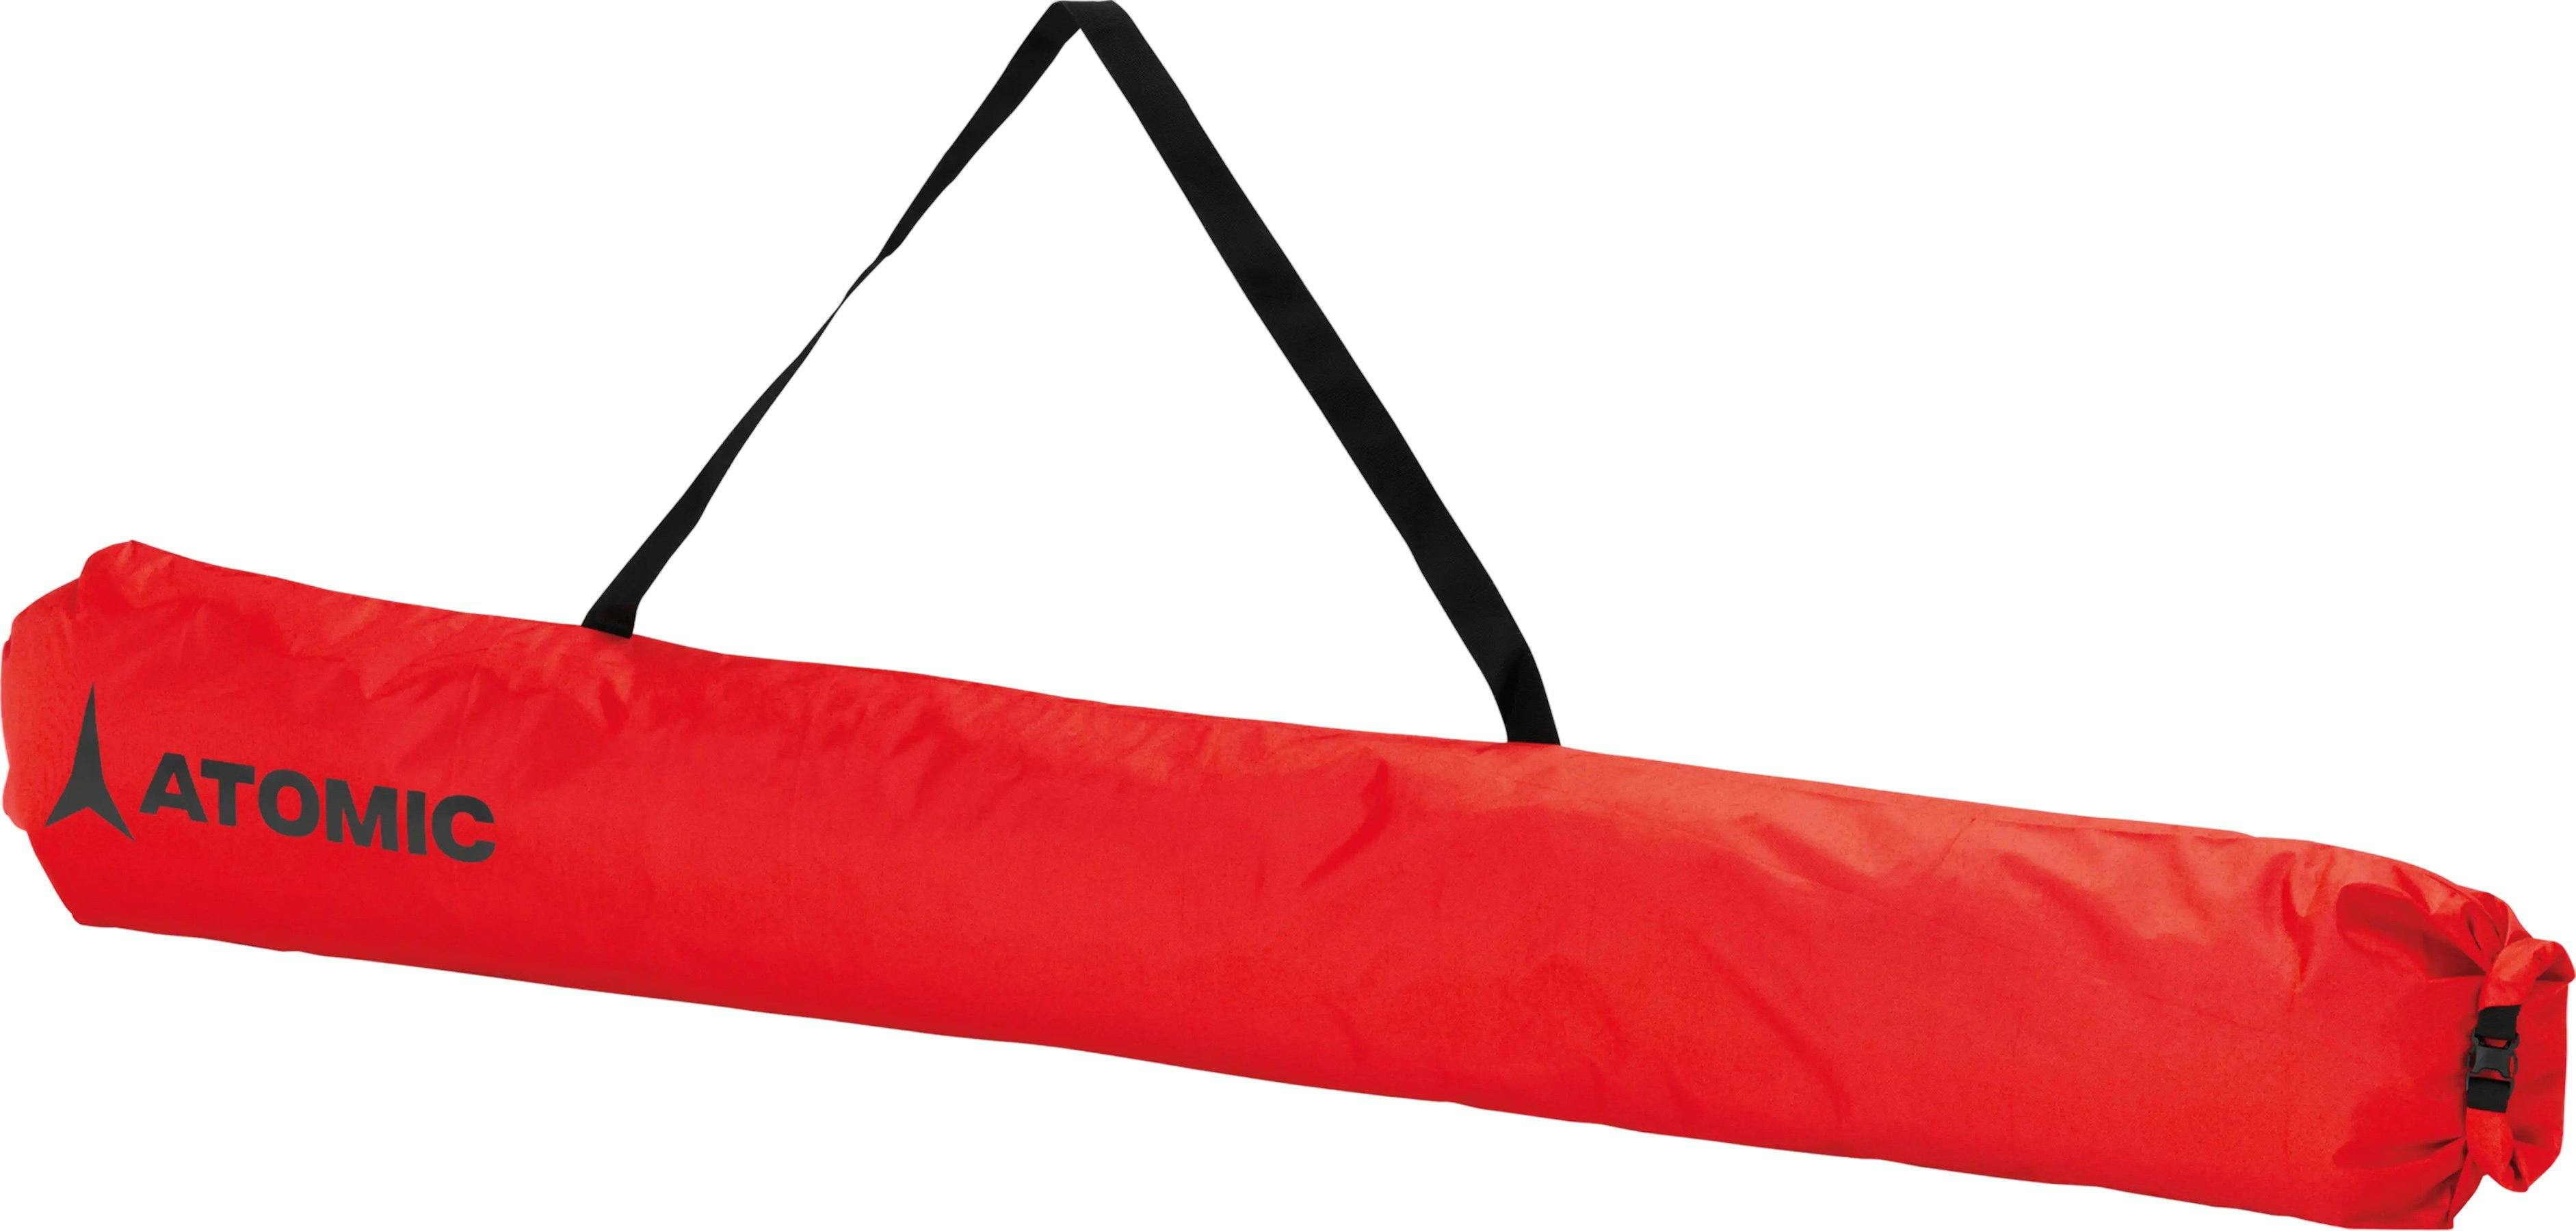 Product image for A Sleeve Skis and Poles Bag